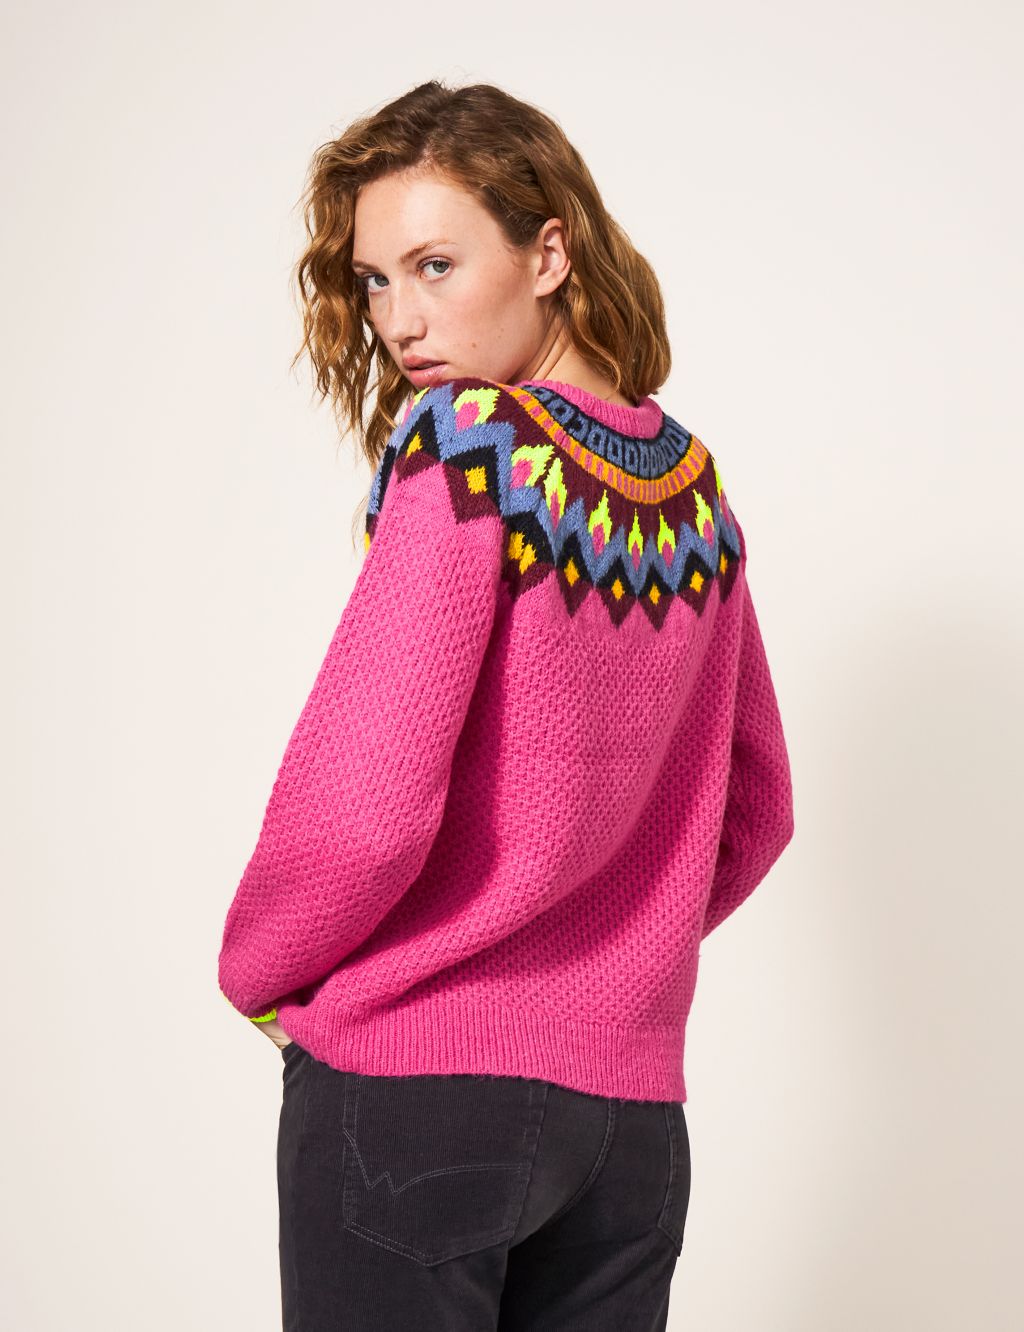 Patterned Crew Neck Jumper with Wool image 4